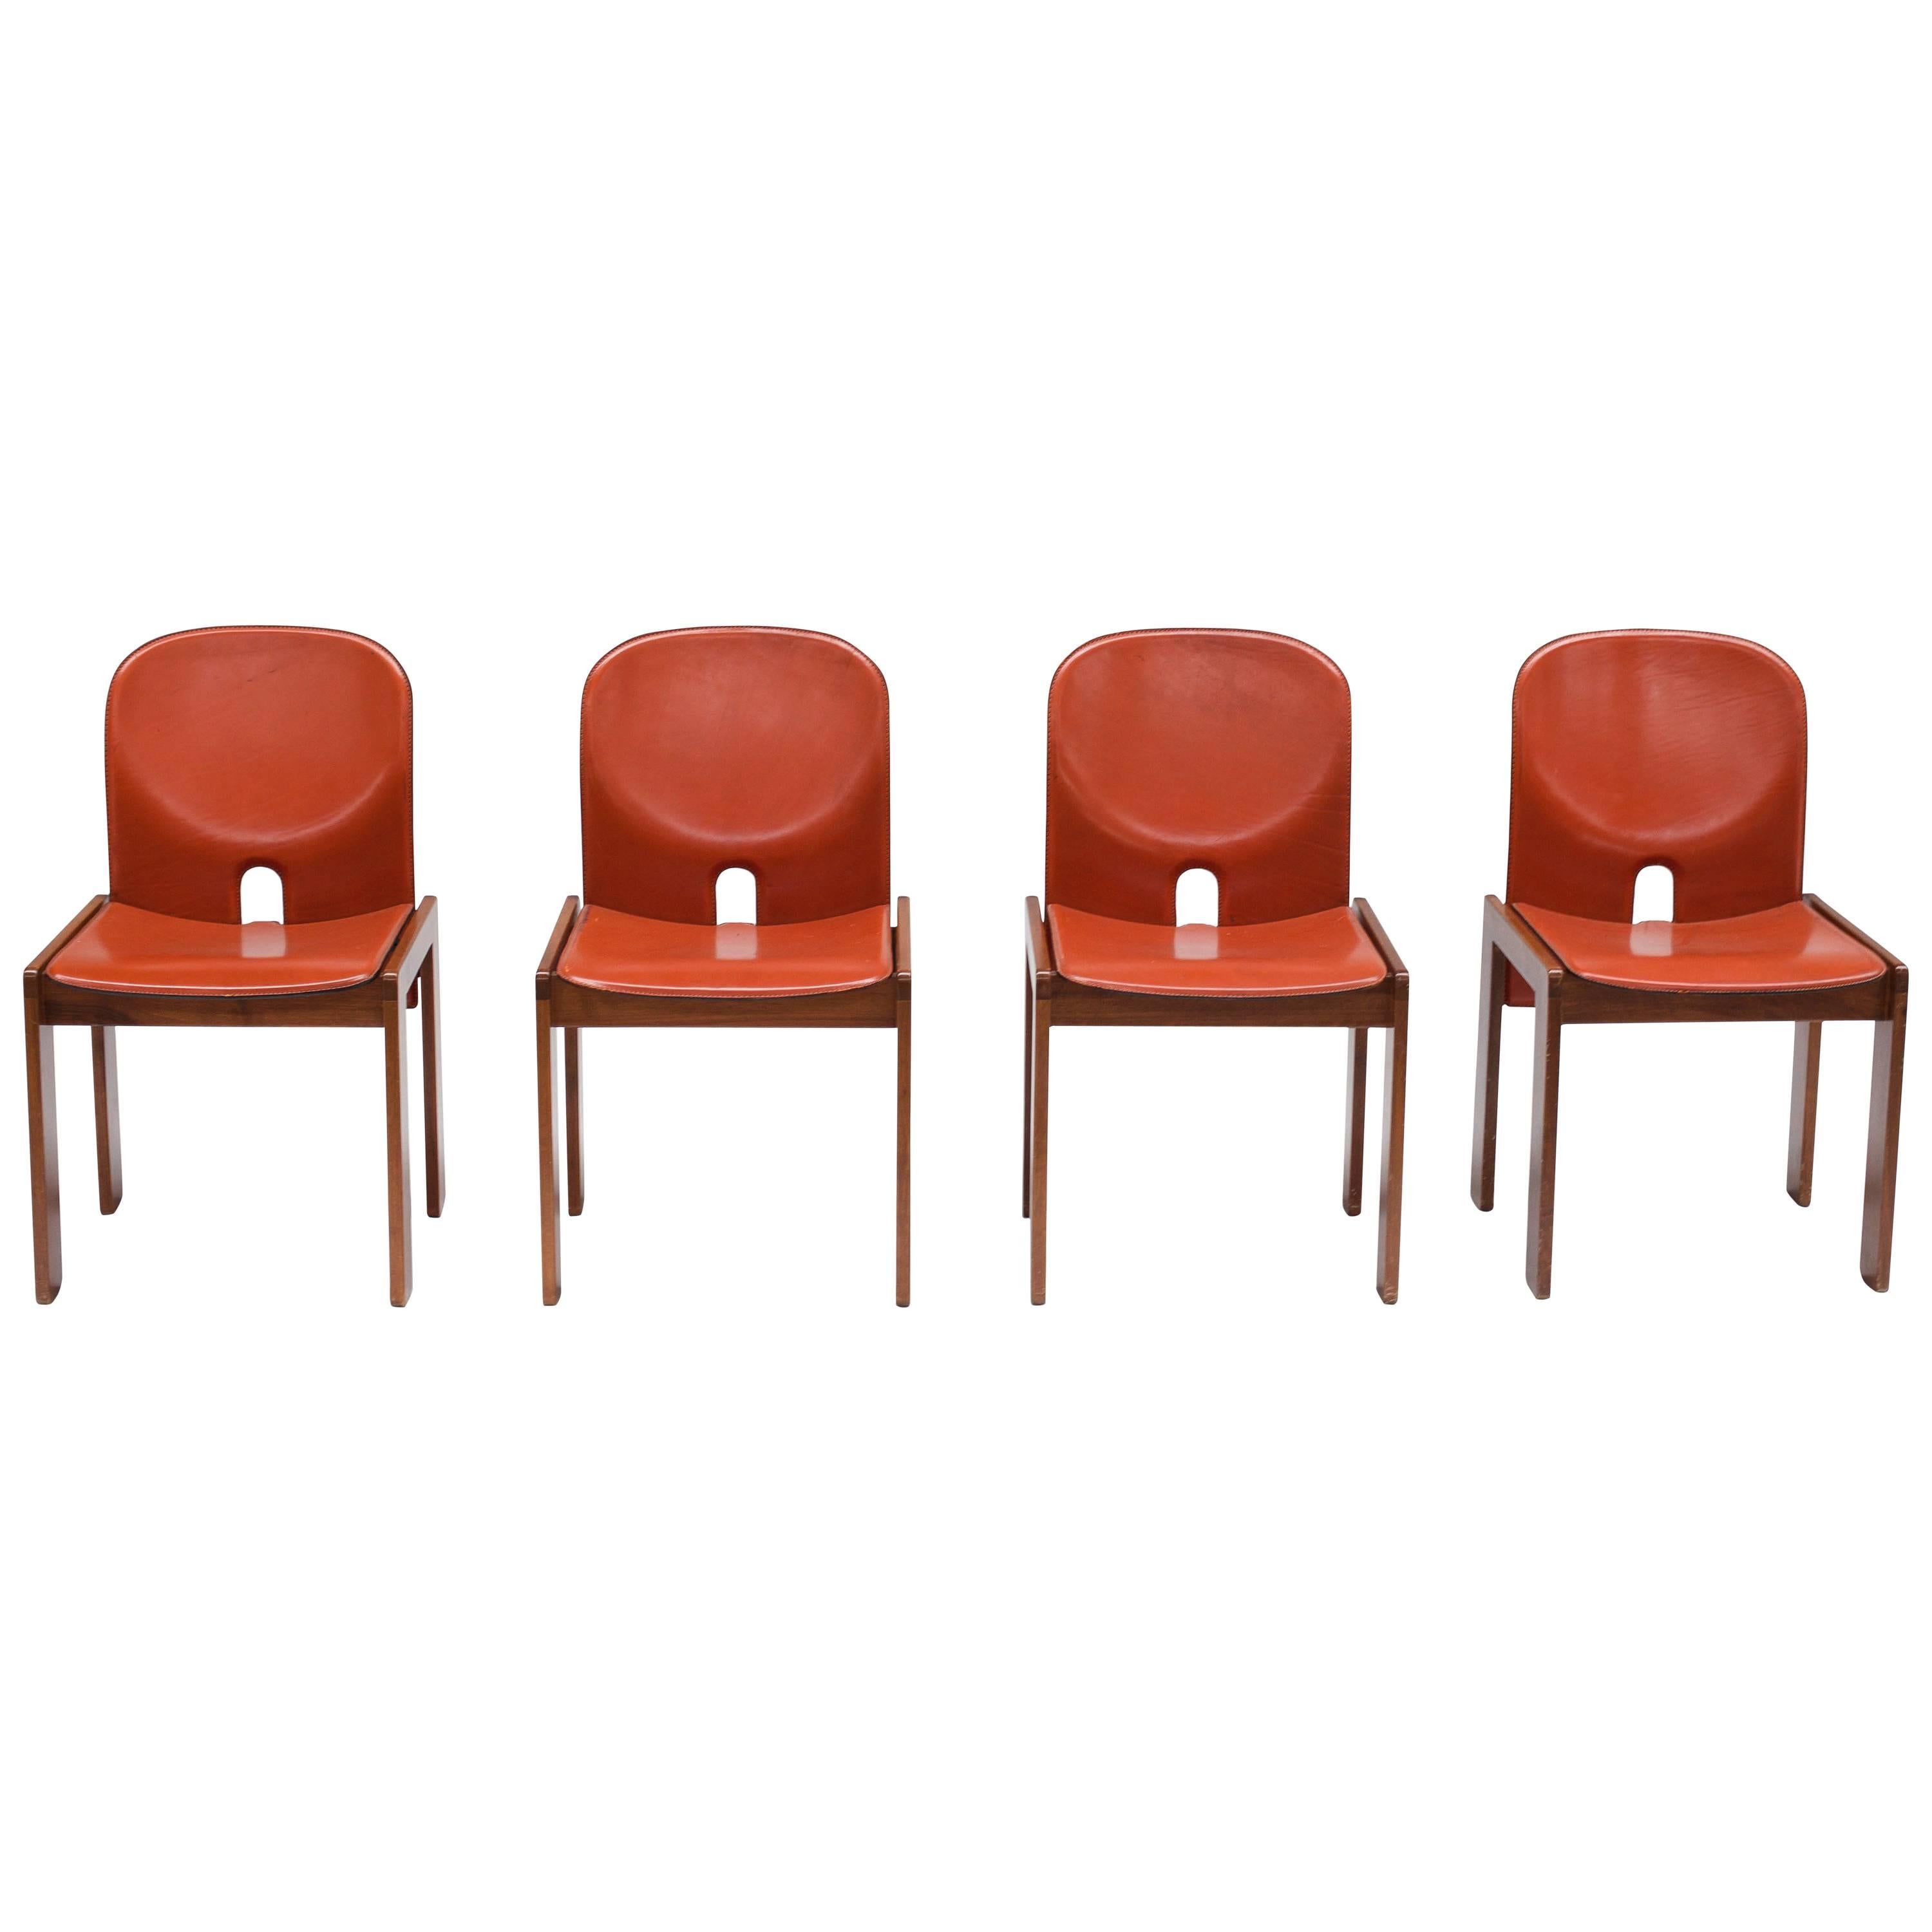 Four Cognac Leather Chairs by Tobia & Afra Scarpa for Cassina